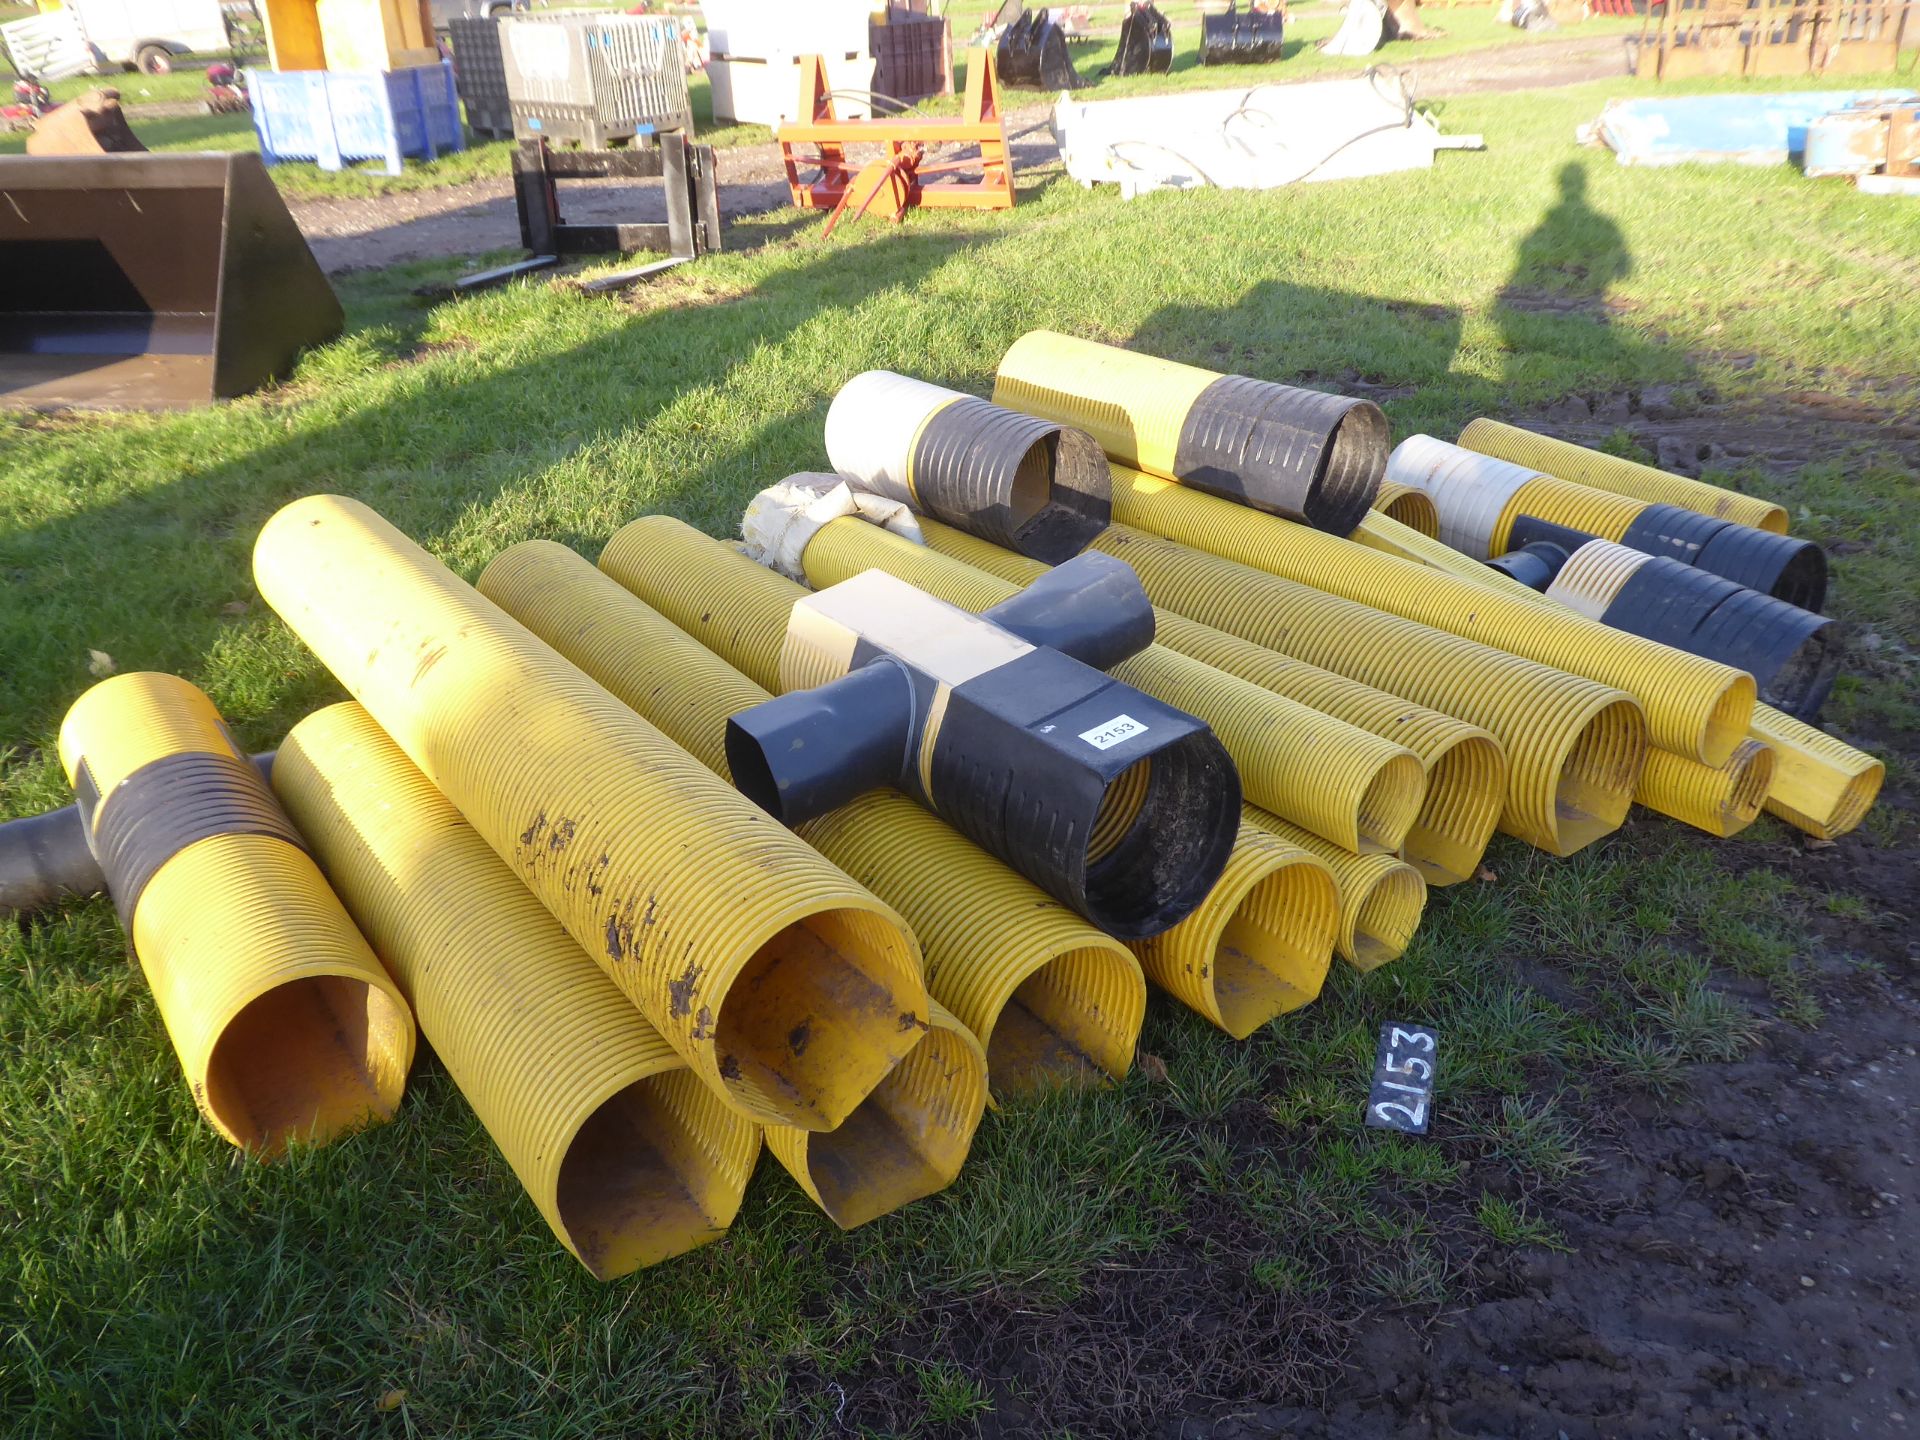 Corn dryer ducting: approx 60ft of 10" in 6ft sections, approx 40ft of 6" pipe with 10"-6"